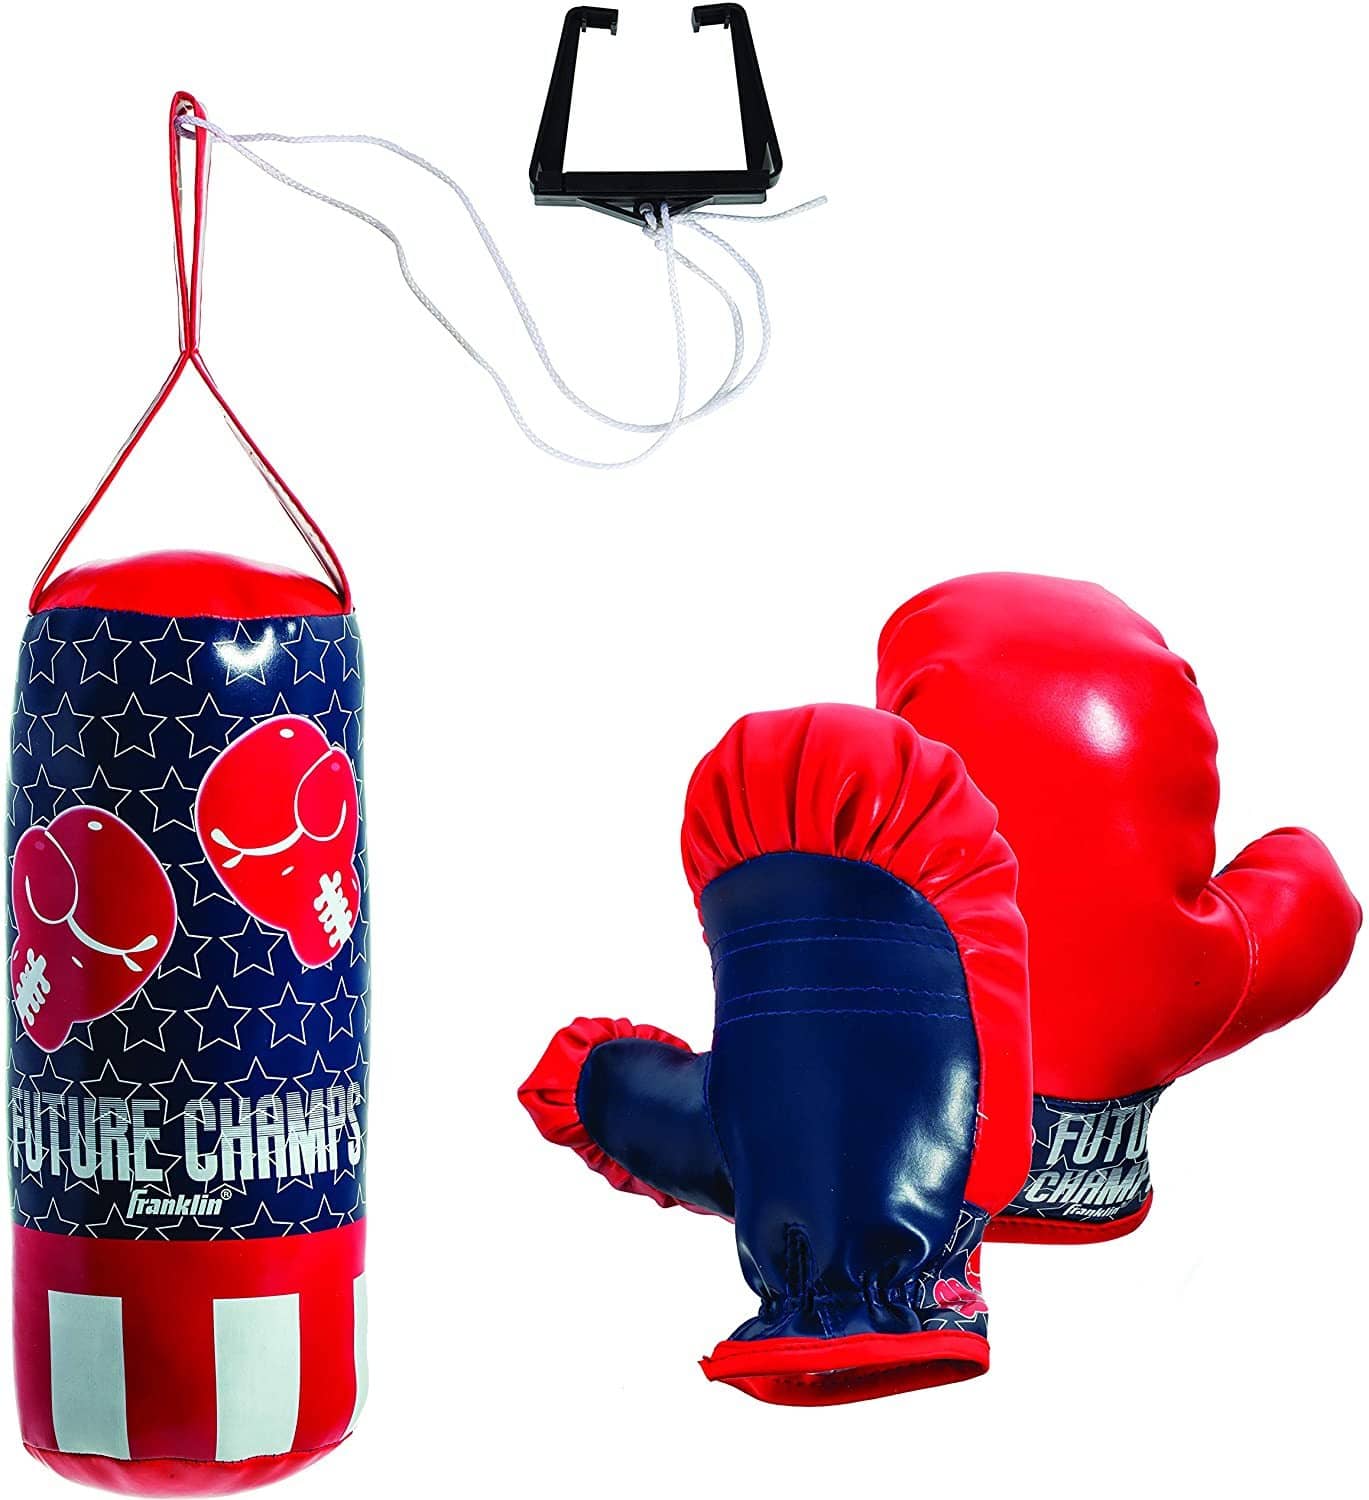 Franklin Sports: Future Champs Punching Bag And Glove Set-Kidding Around NYC